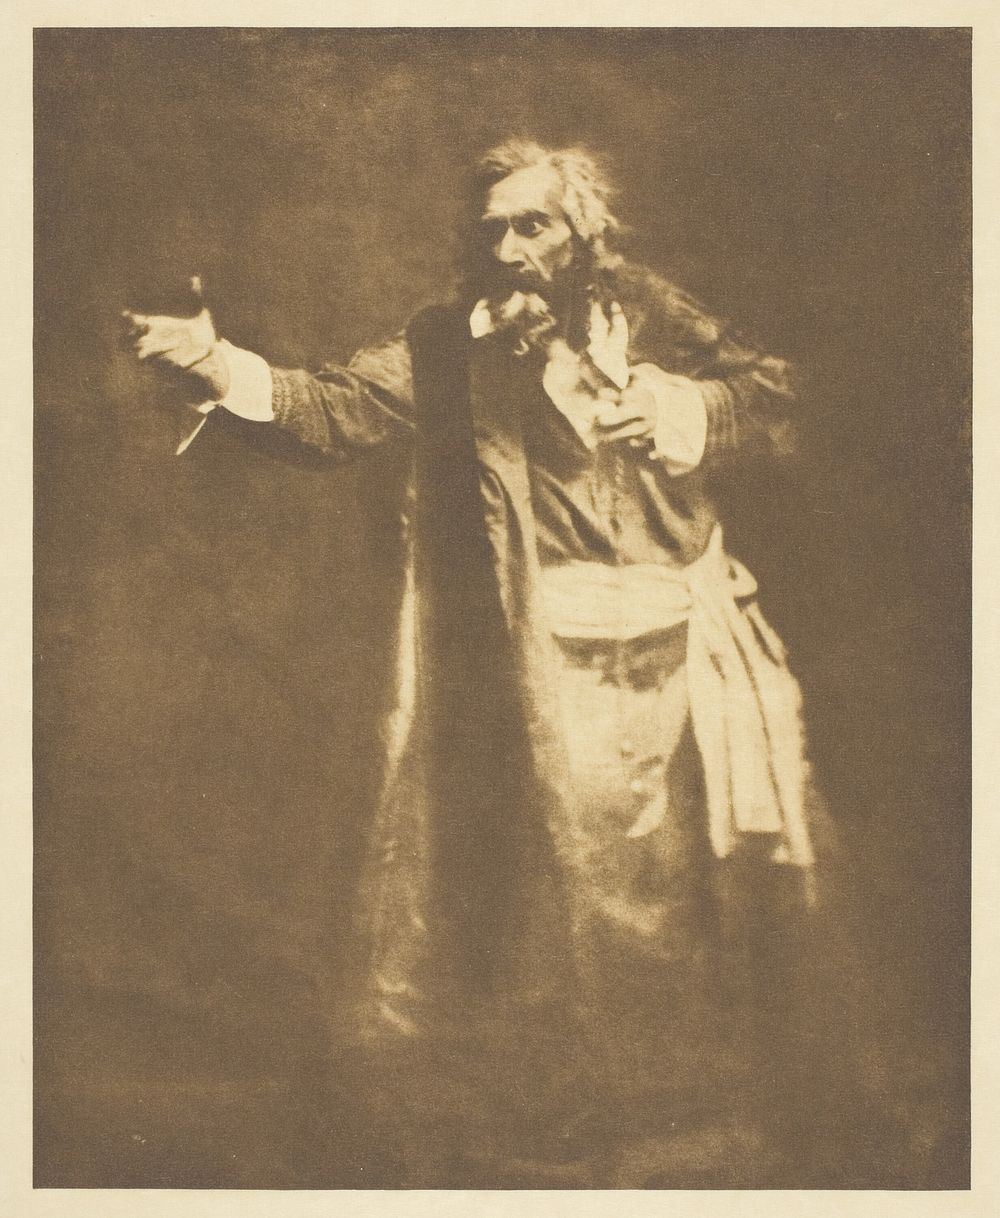 Shylock-A Sketch, No. 9 from the portfolio "American Pictorial Photography, Series II” (1901) by Joseph T. Keiley